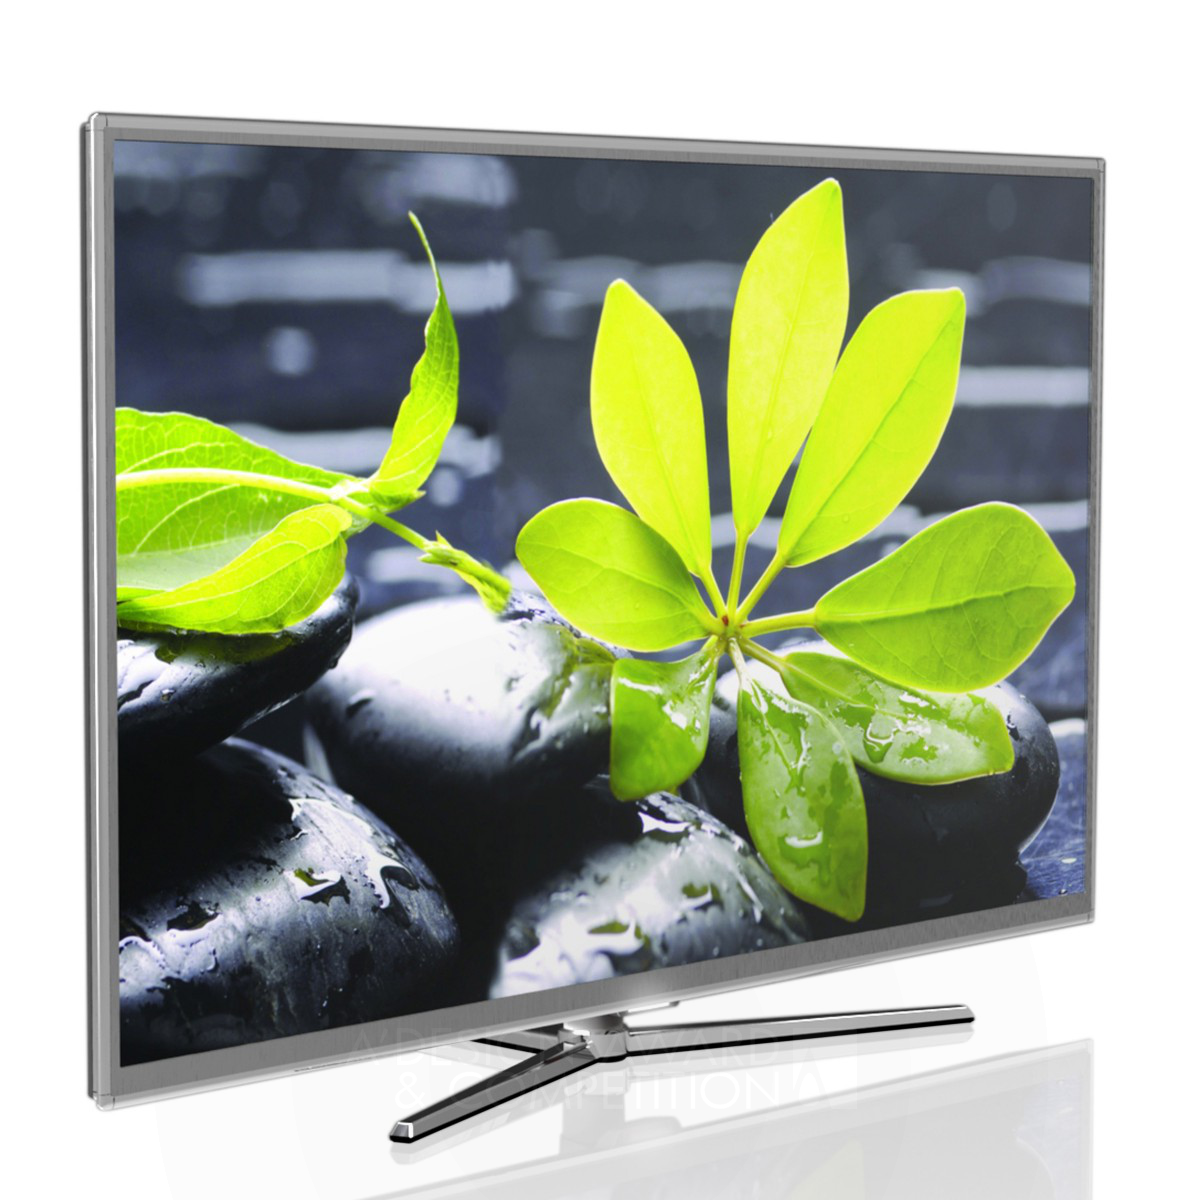 Triump <b>47&quot; LED TV supporting the HD broadcast.